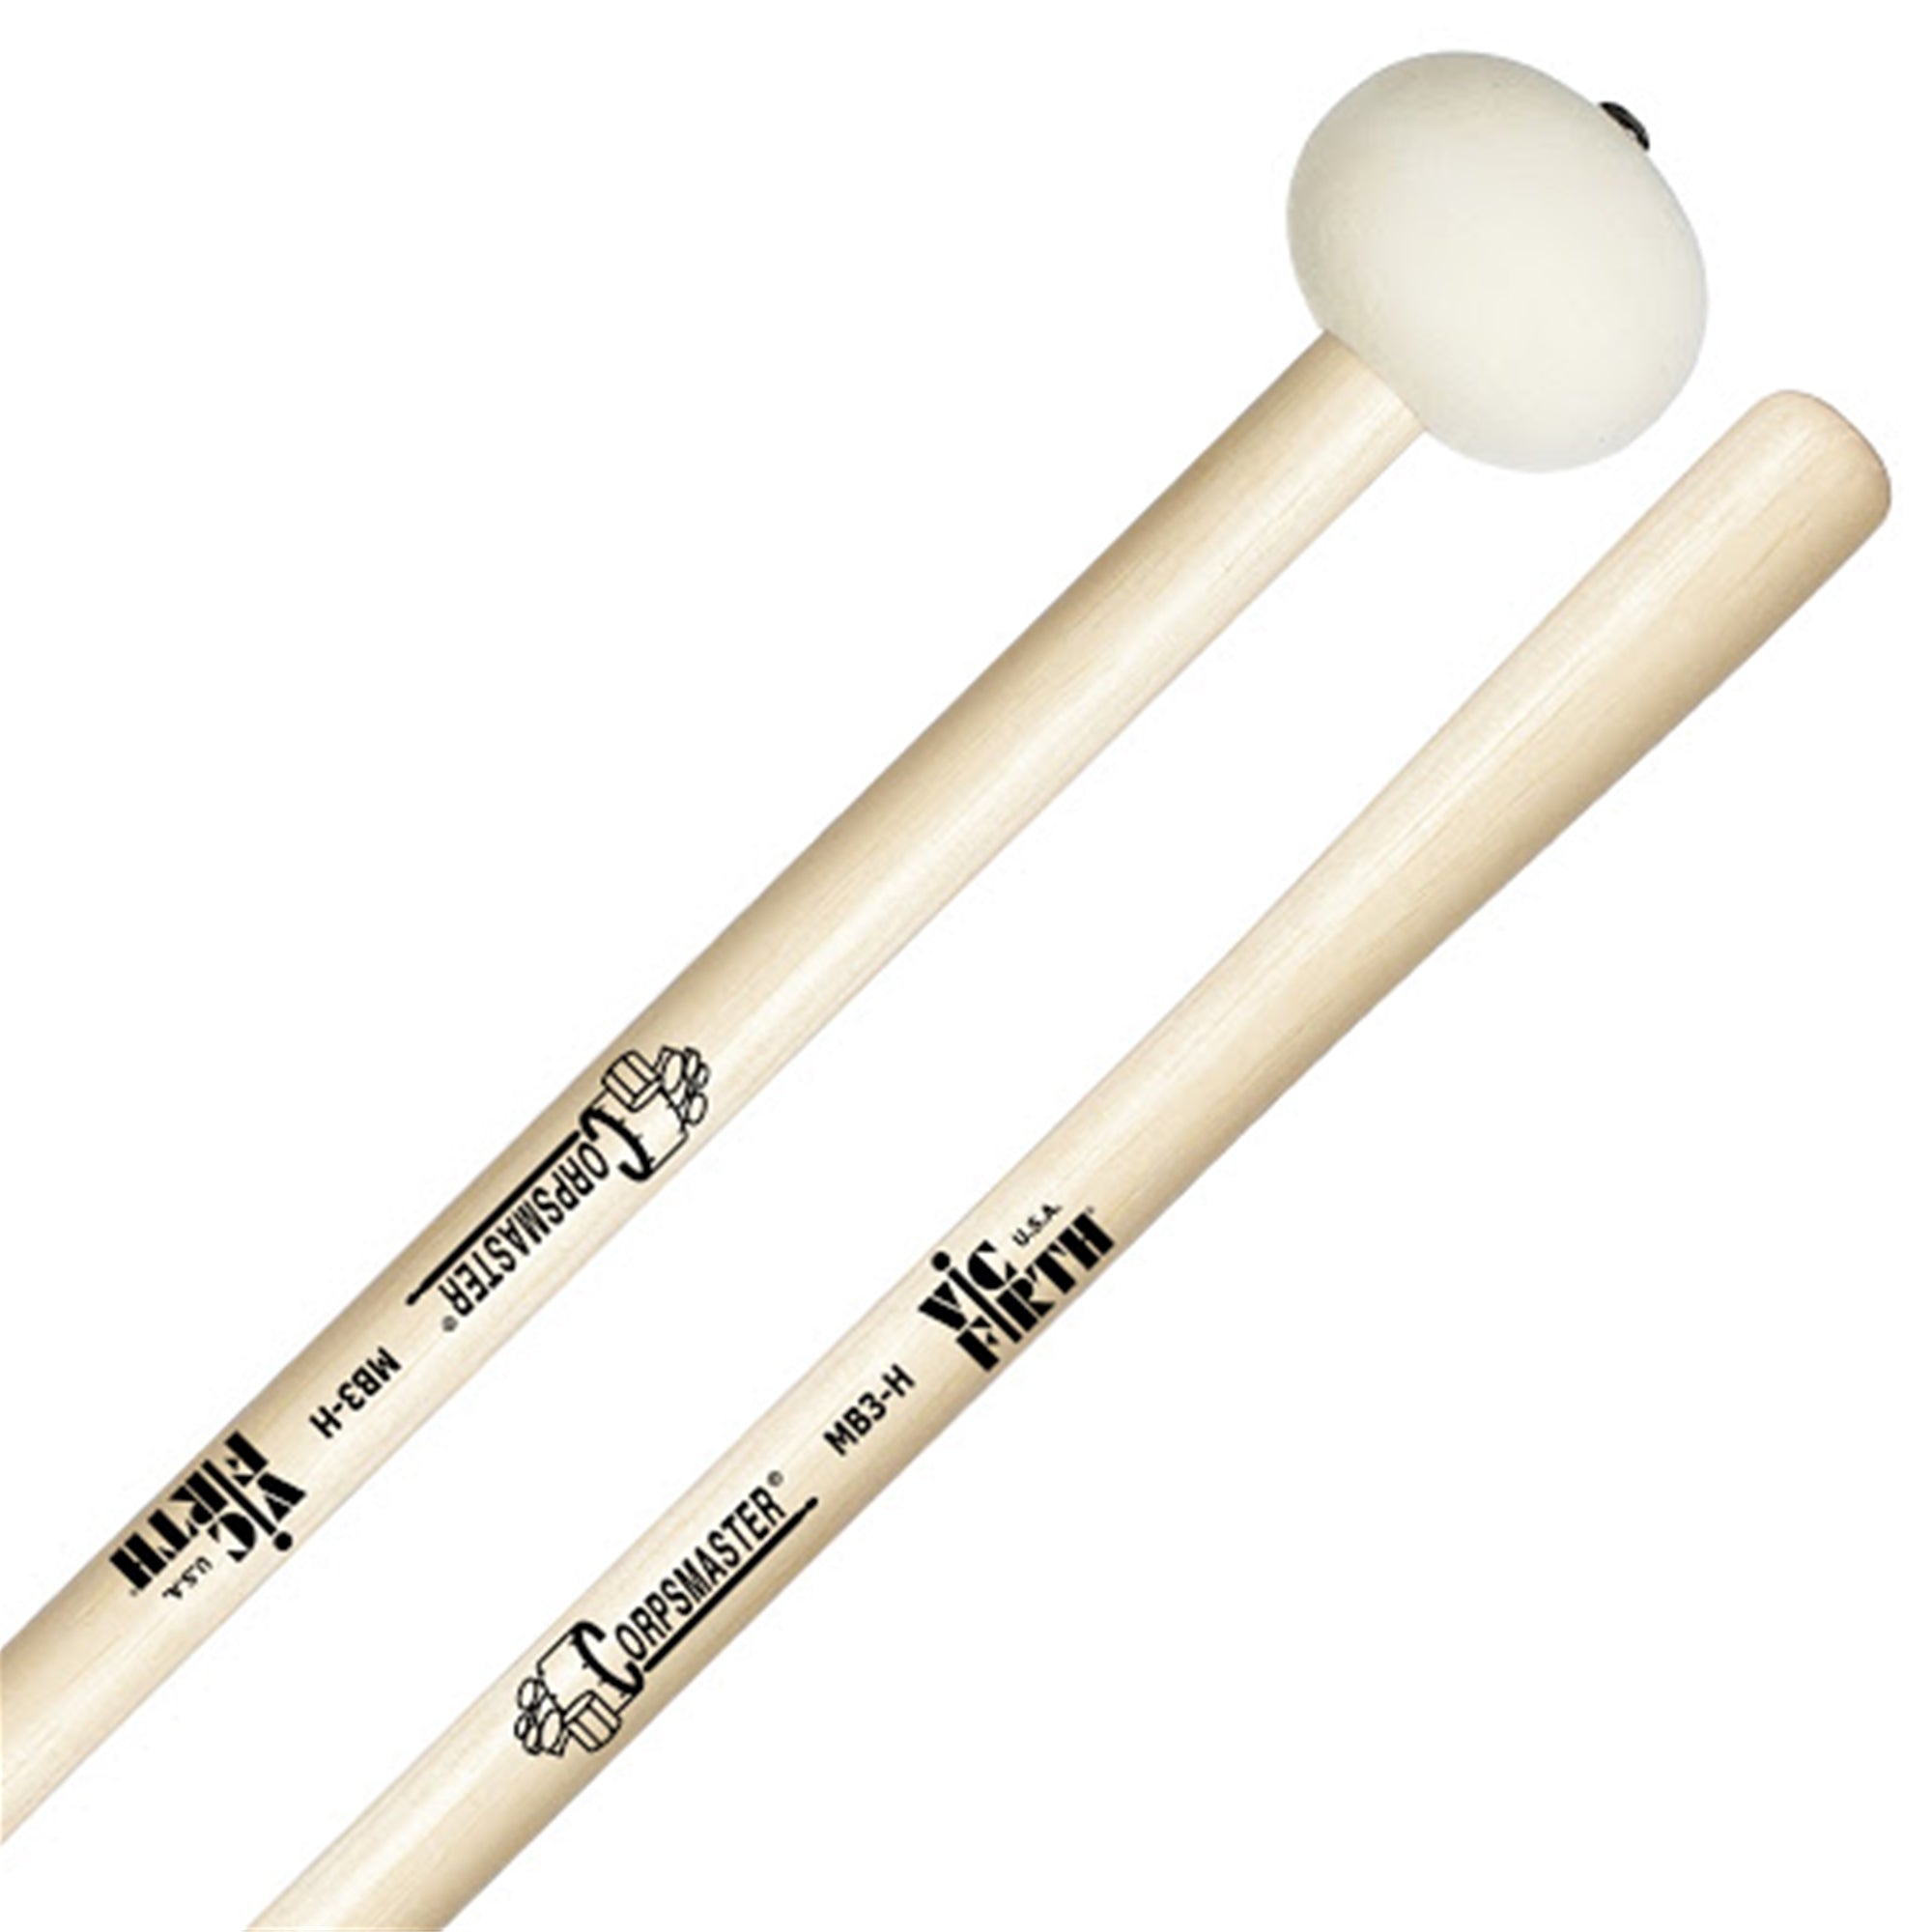 VIC FIRTH VFMB3H Corpsmaster Marching Bass Mallets, Large